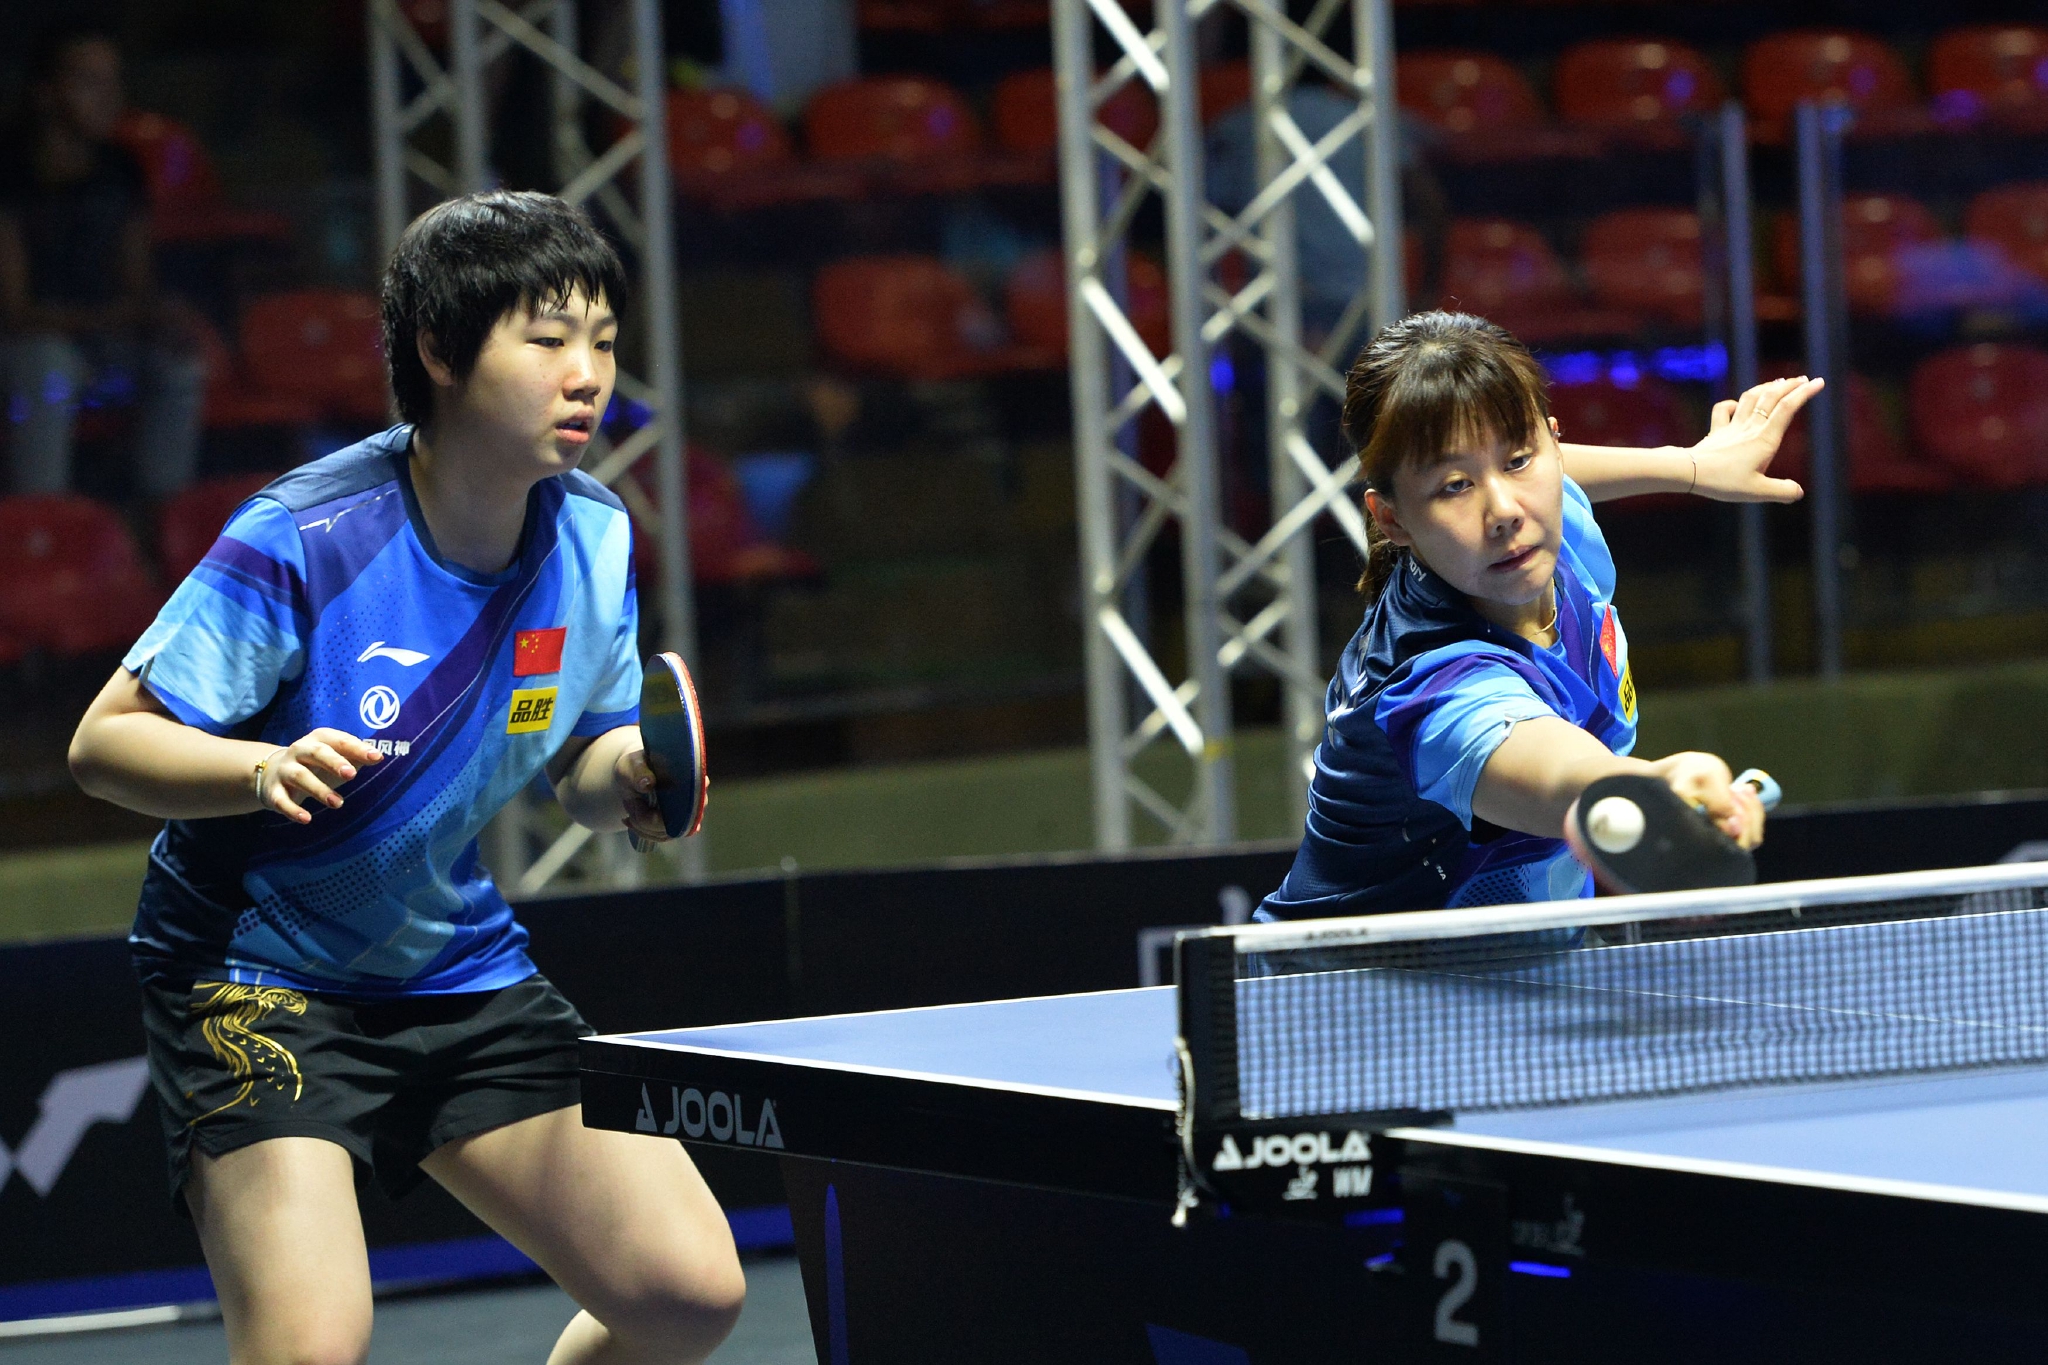 Chen Xingtong (R) and Kuai Man of China compete in the women's doubles quarterfinals at the World Table Tennis Championships Star Contender Bangkok 2023, Thailand, April 26, 2023. /Xinhua